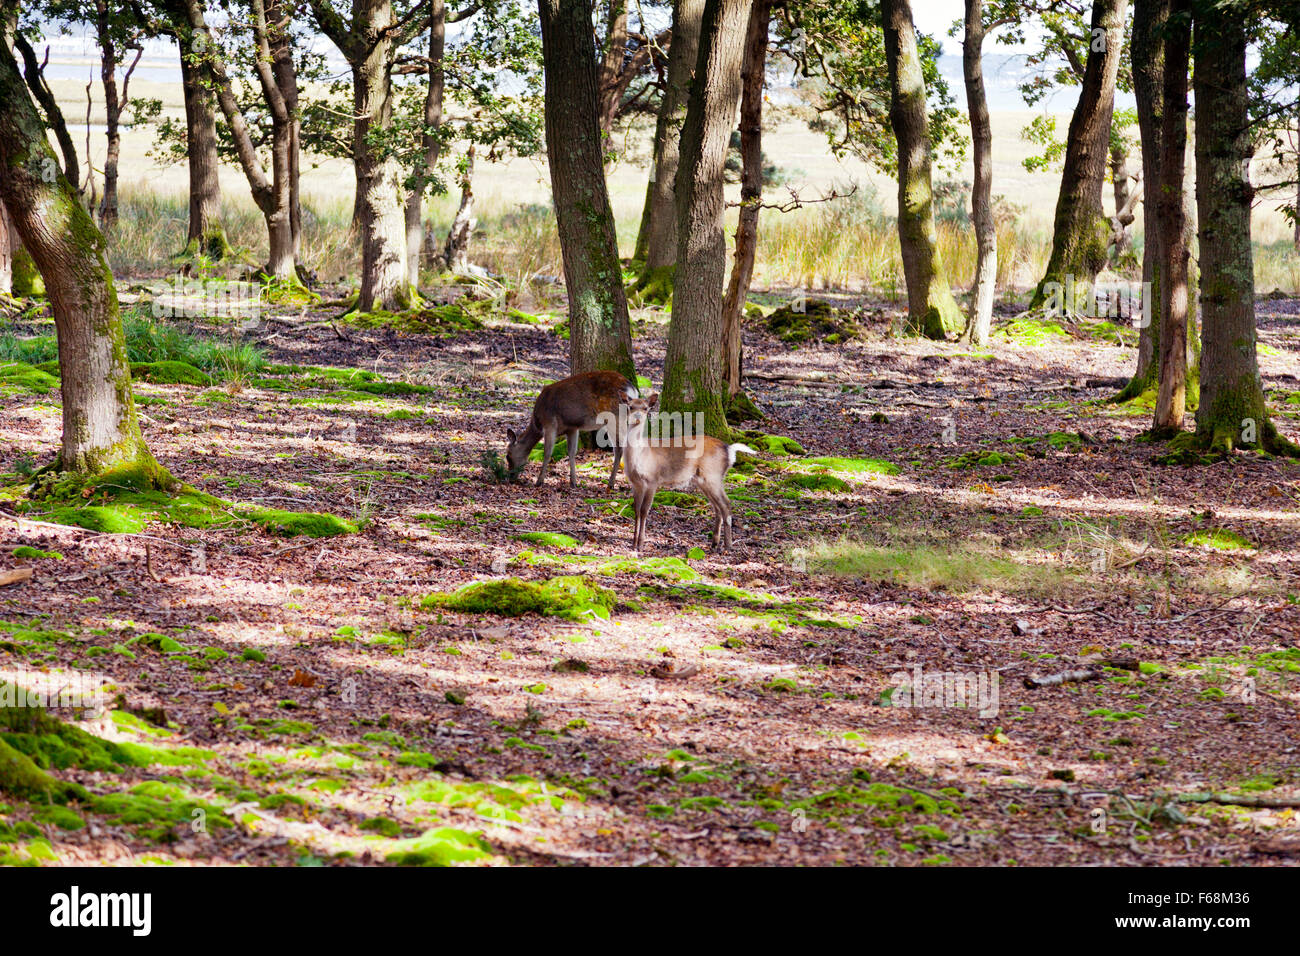 A female Sika deer and fawn in the woodland at the RSPB Arne reserve in Poole Harbour, Dorset, England. Stock Photo